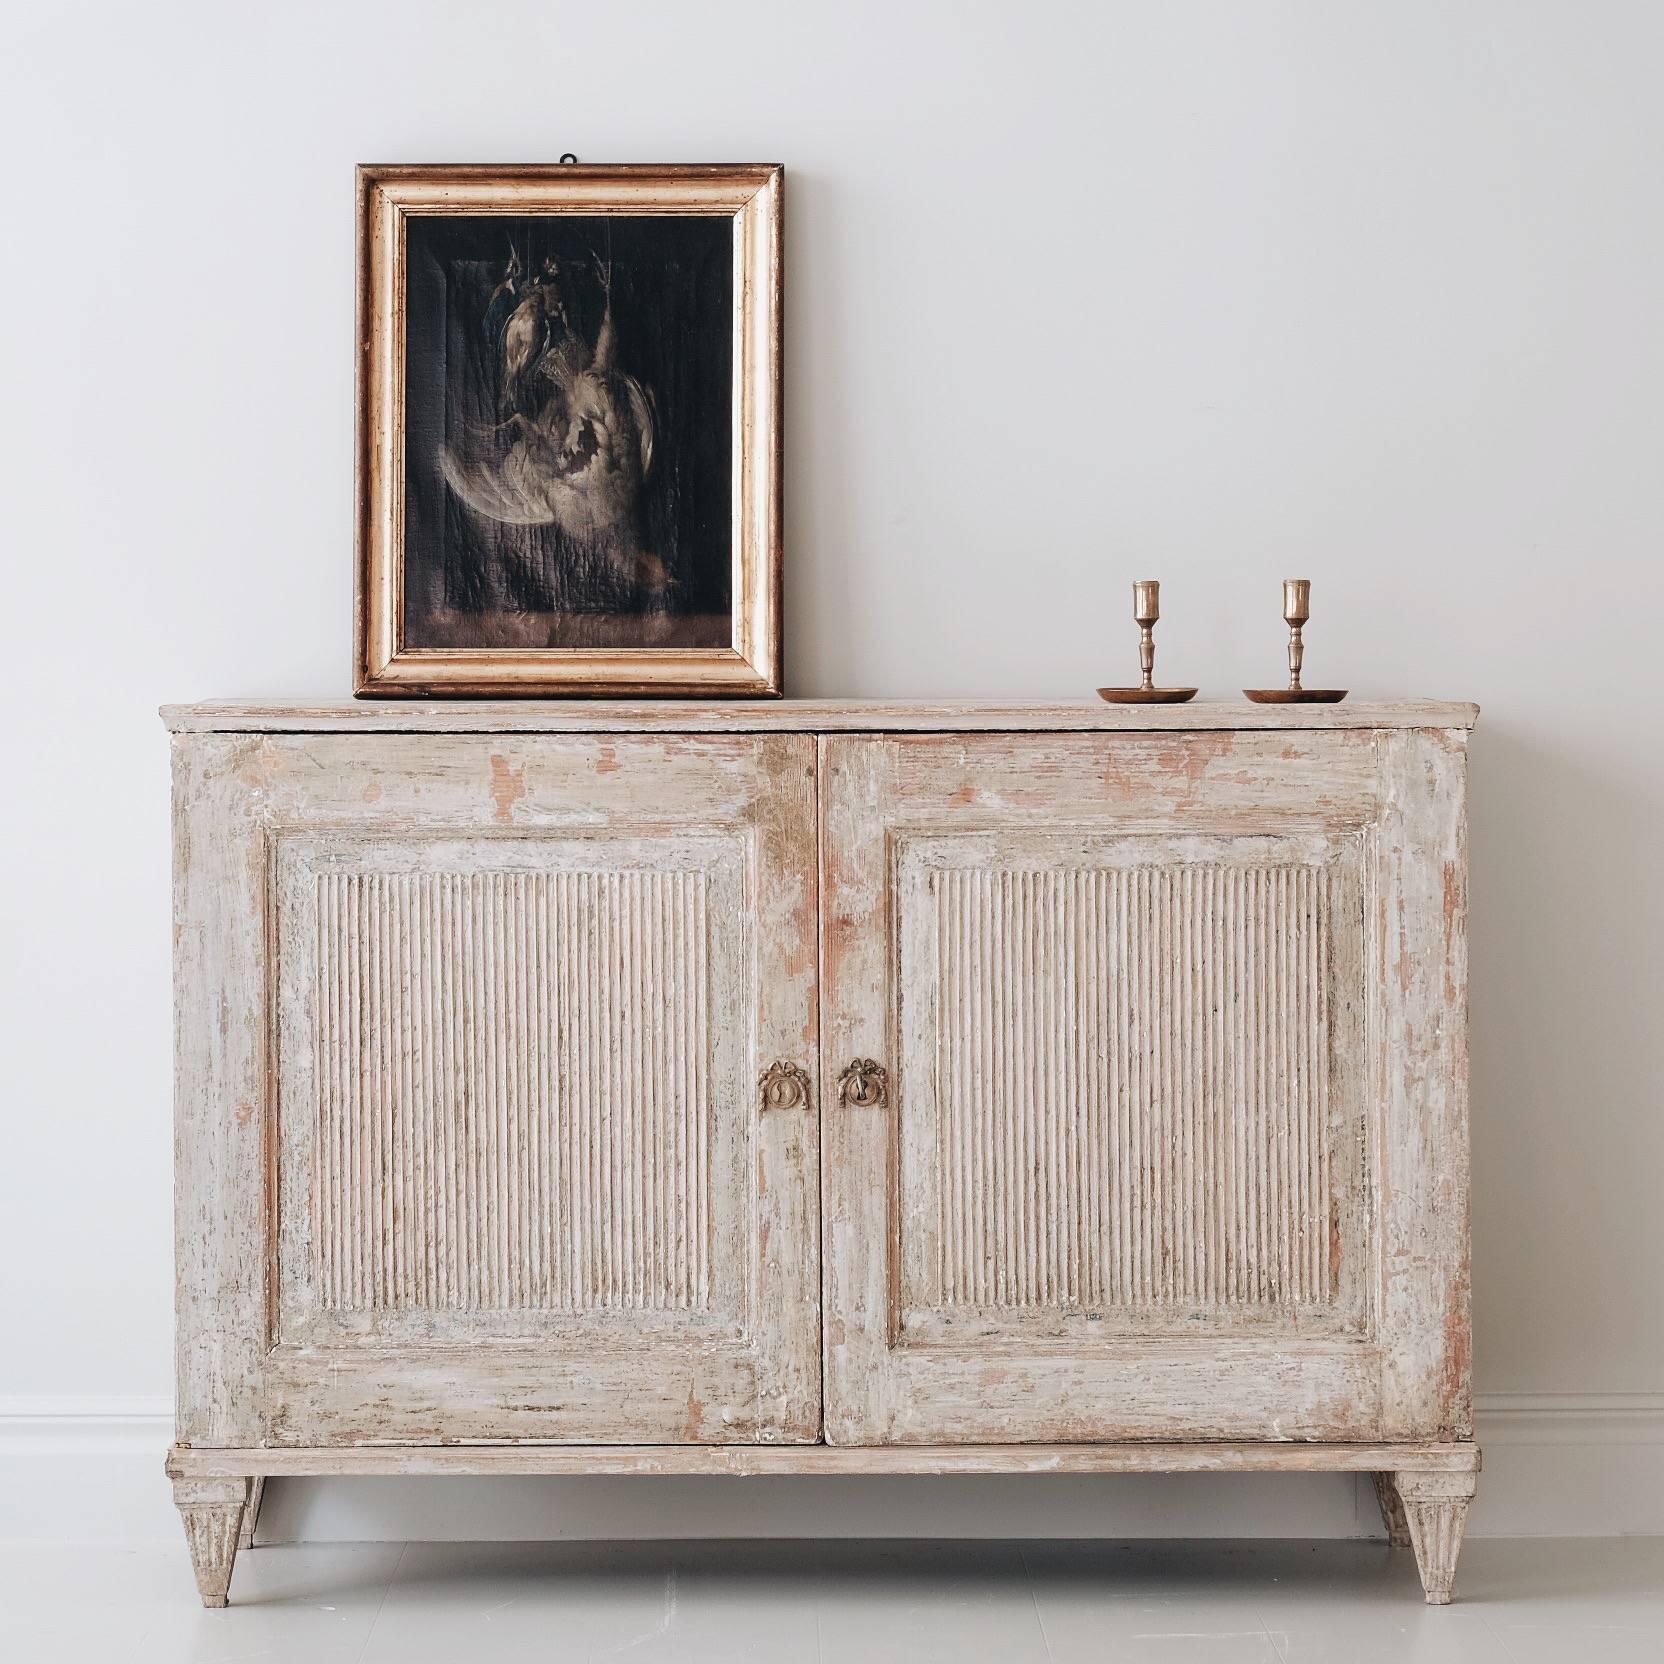 Good 19th century Swedish period Gustavian sideboard in original colour.

Condition: Good.

Wear: Wear consistent with age and use.

Finish: Dry scraped to original color.

Year: circa 1810.